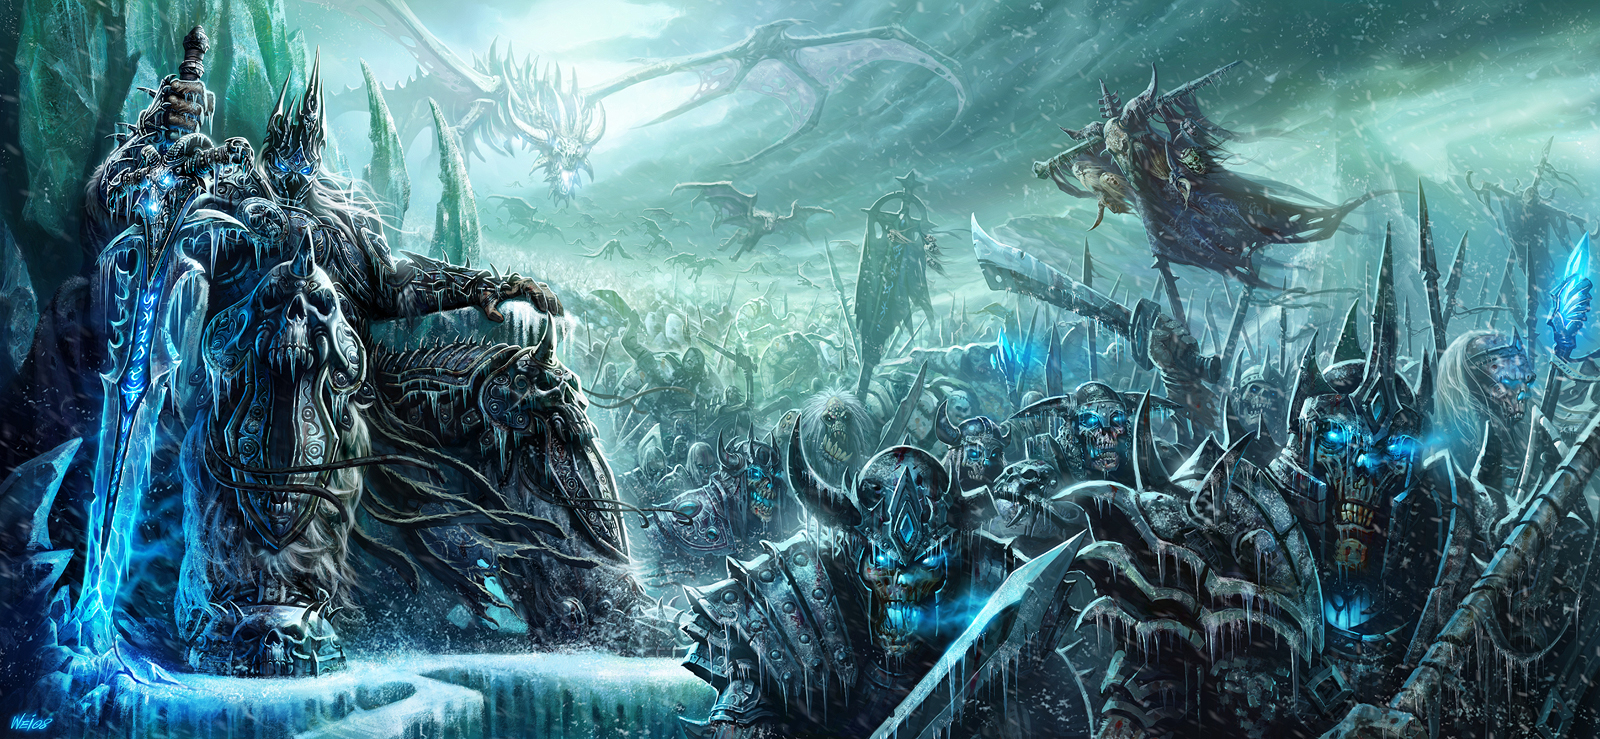 World Of Warcraft: Wrath Of The Lich King #6